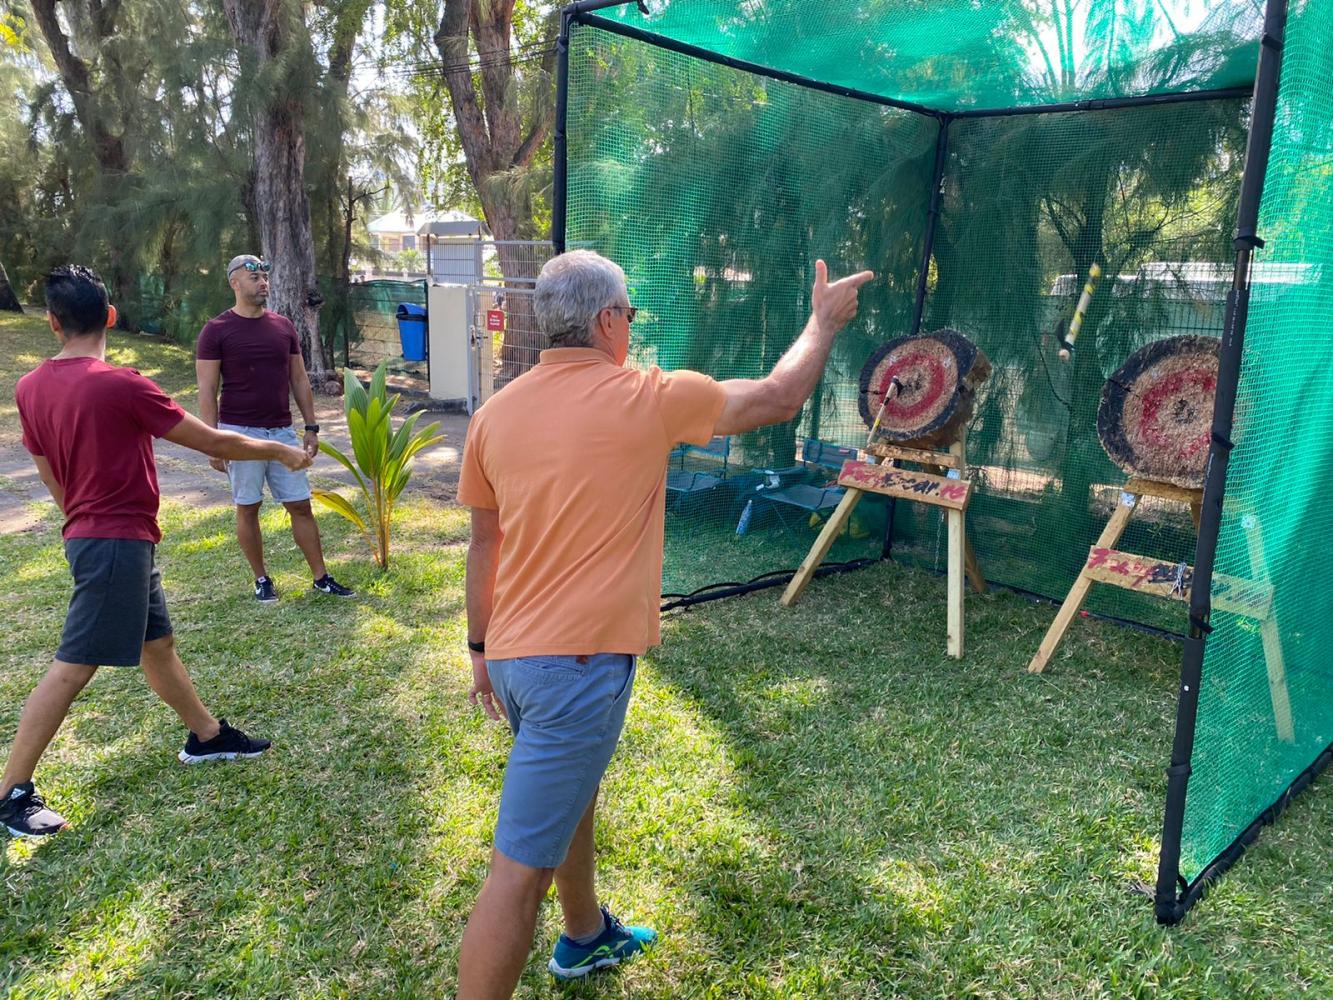 An axe-throwing stand at your event